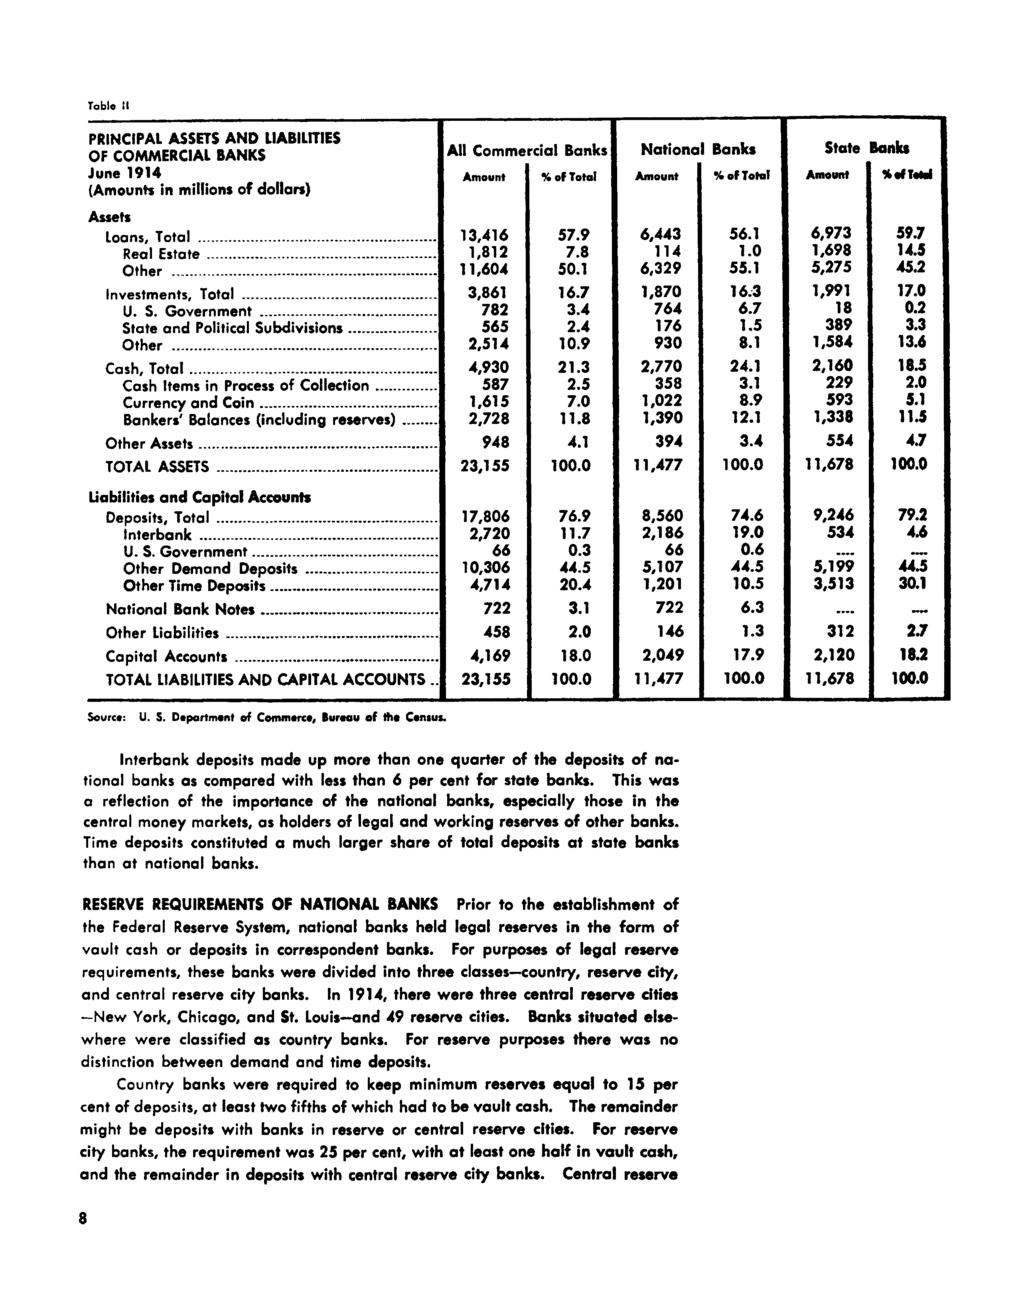 Tab! II PRINCIPAL ASSETS AND LIABILITIES OF COMMERCIAL BANKS All Commercial Banks National Banks State Bank* June 1914 Amount % of Total Amount of Total Amount (Amounts in millions of dollars) Assets